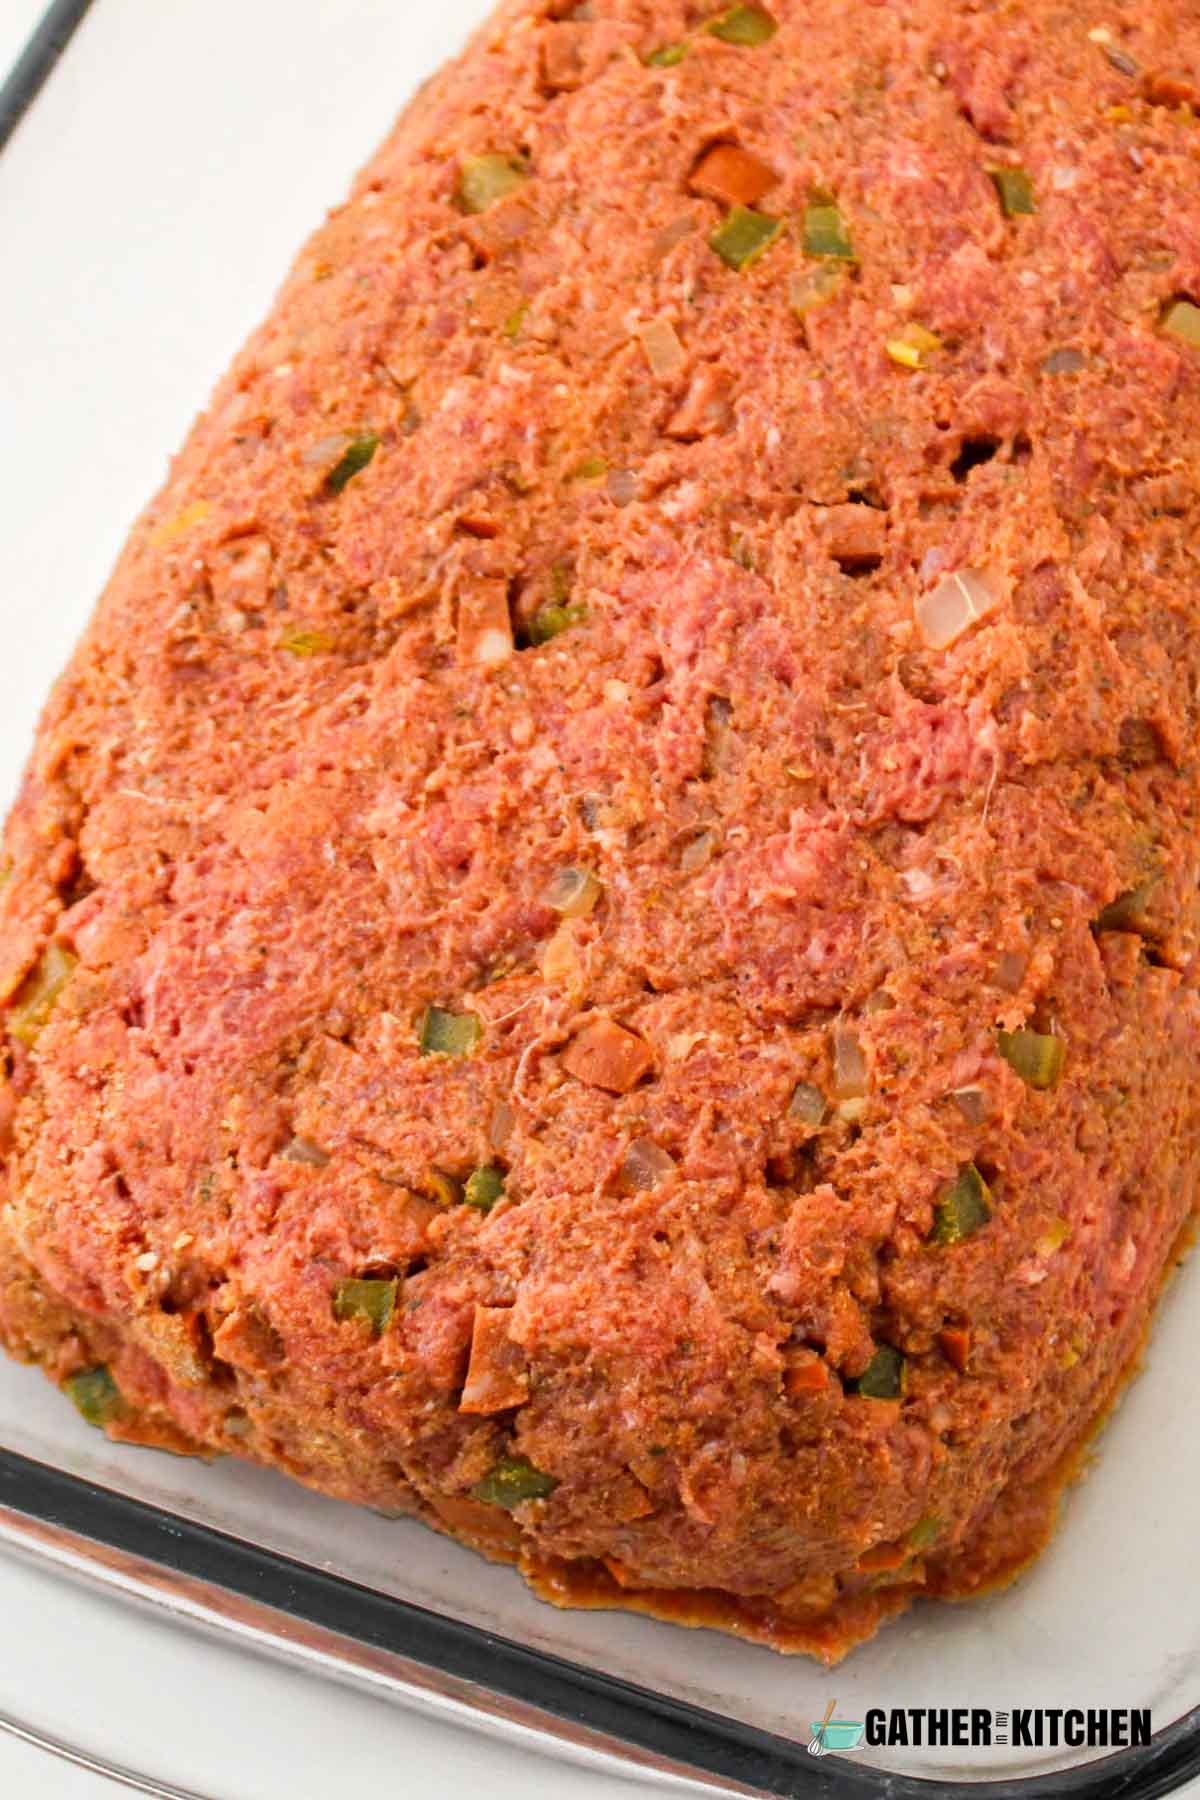 Meat mixture shaped into a meatloaf.